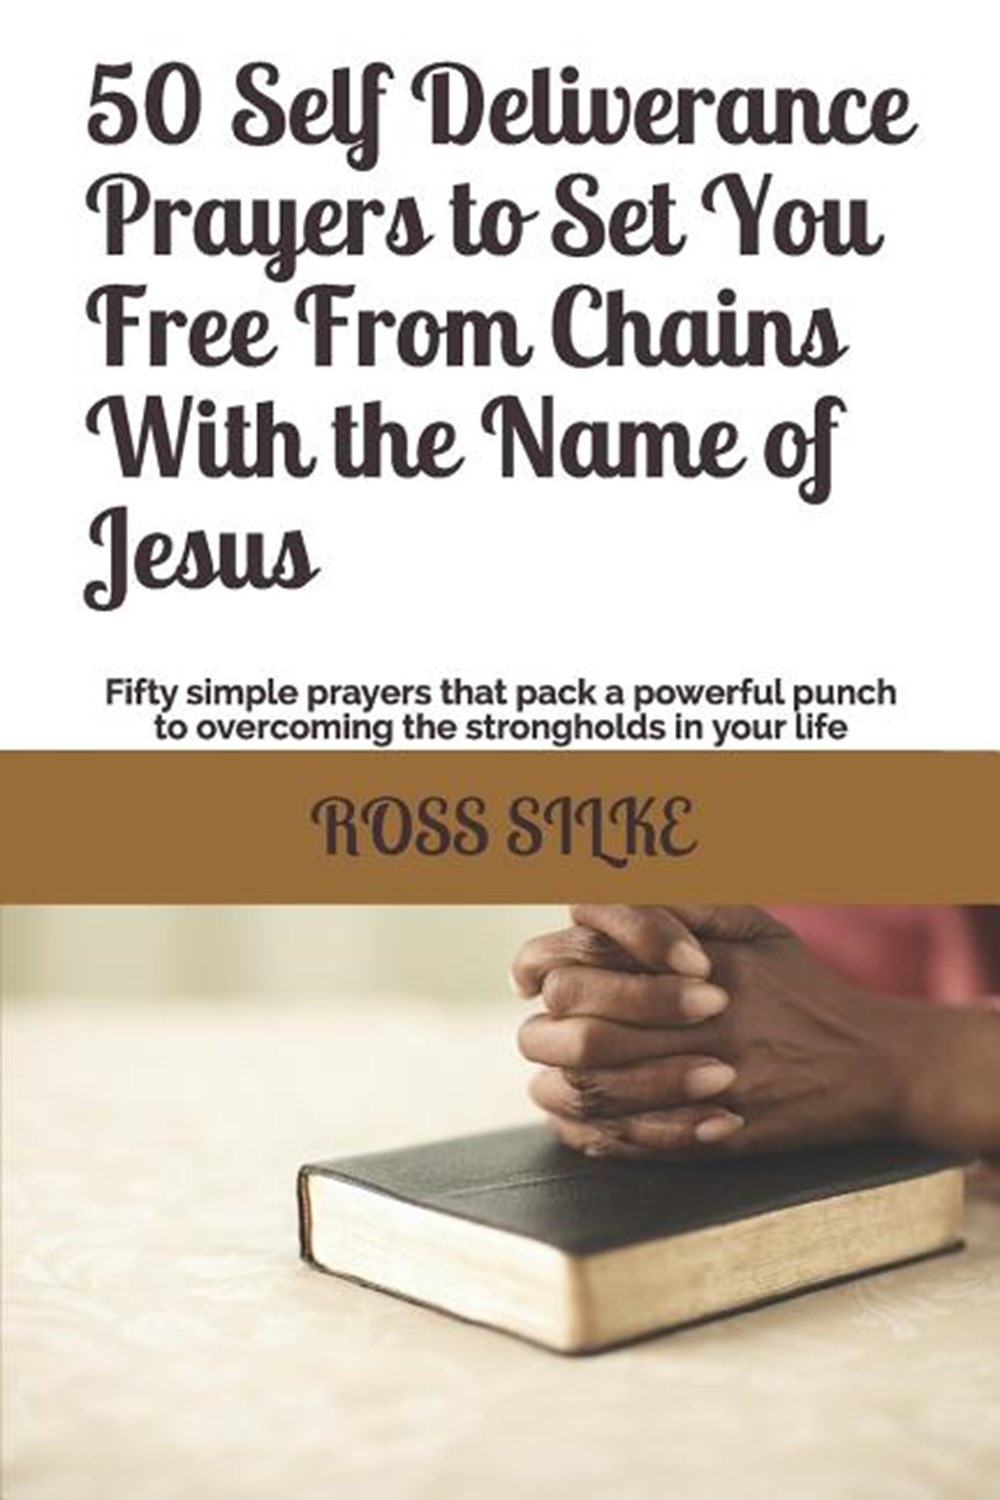 50 Self Deliverance Prayers to Set You Free From Chains With the Name of Jesus: Fifty simple prayers